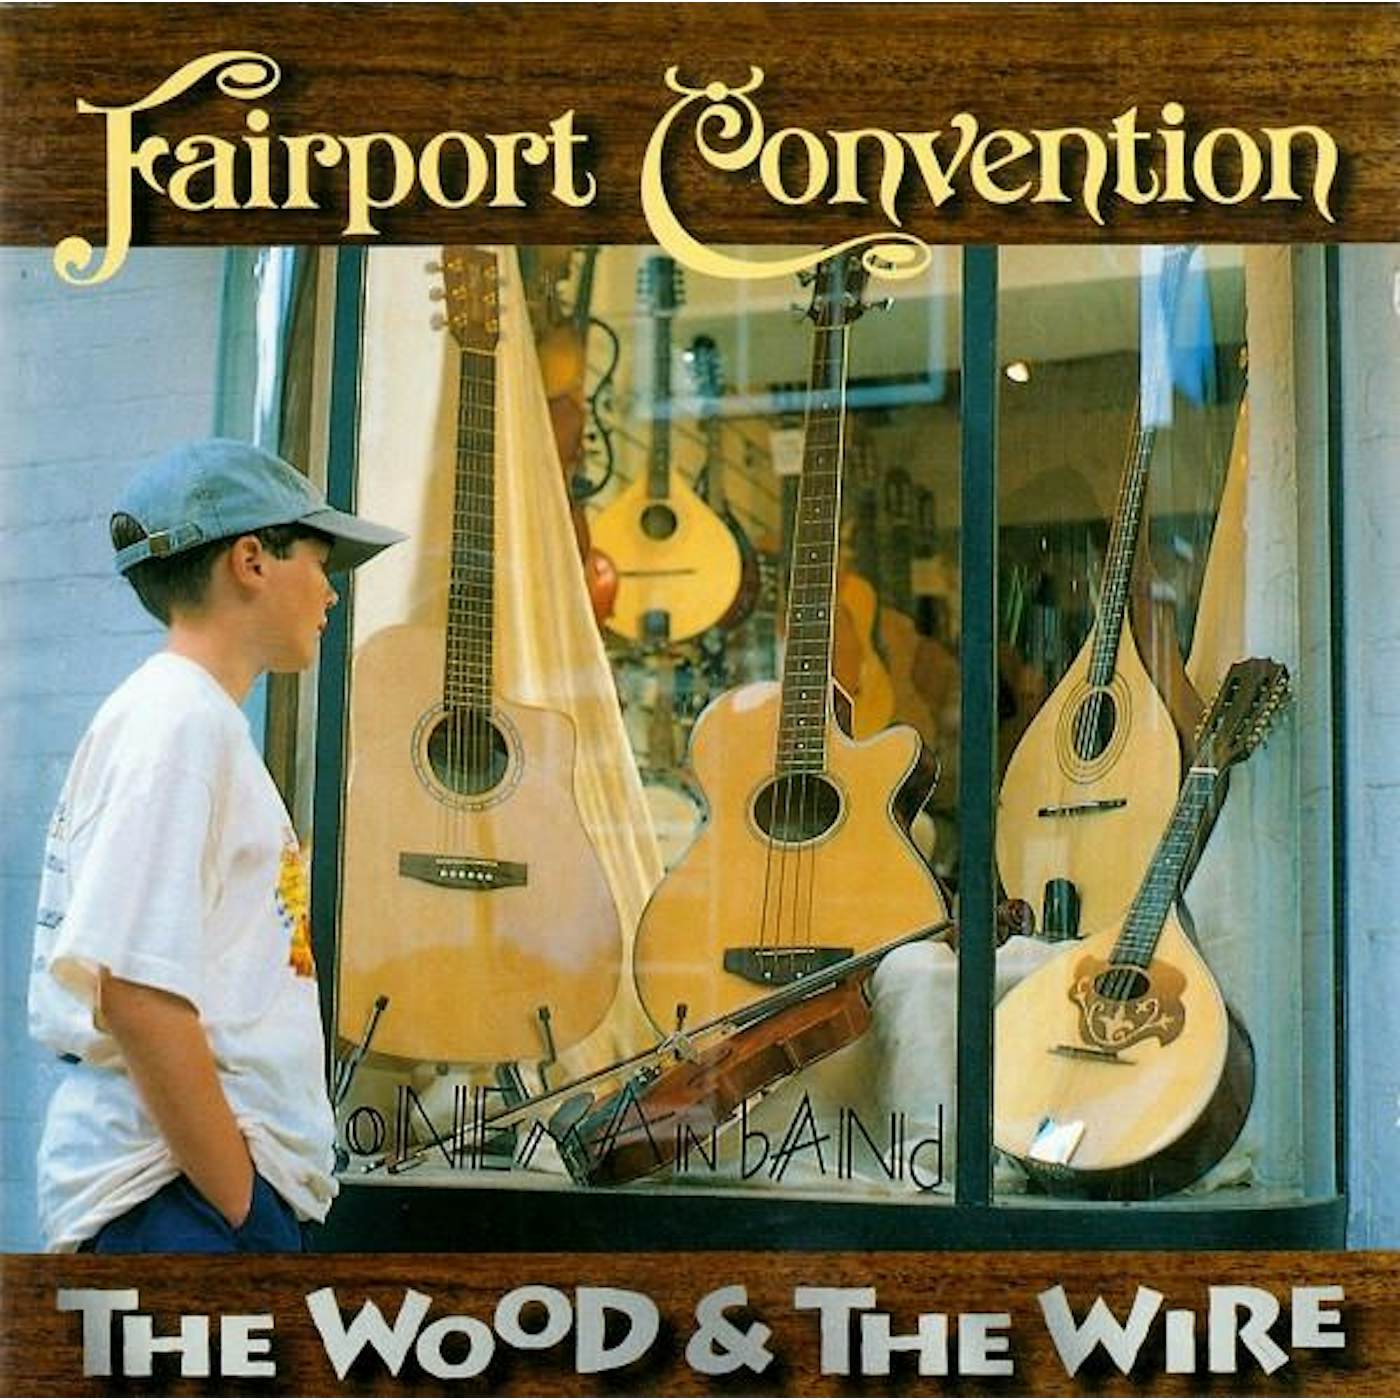 Fairport Convention WOOD & THE WIRE CD